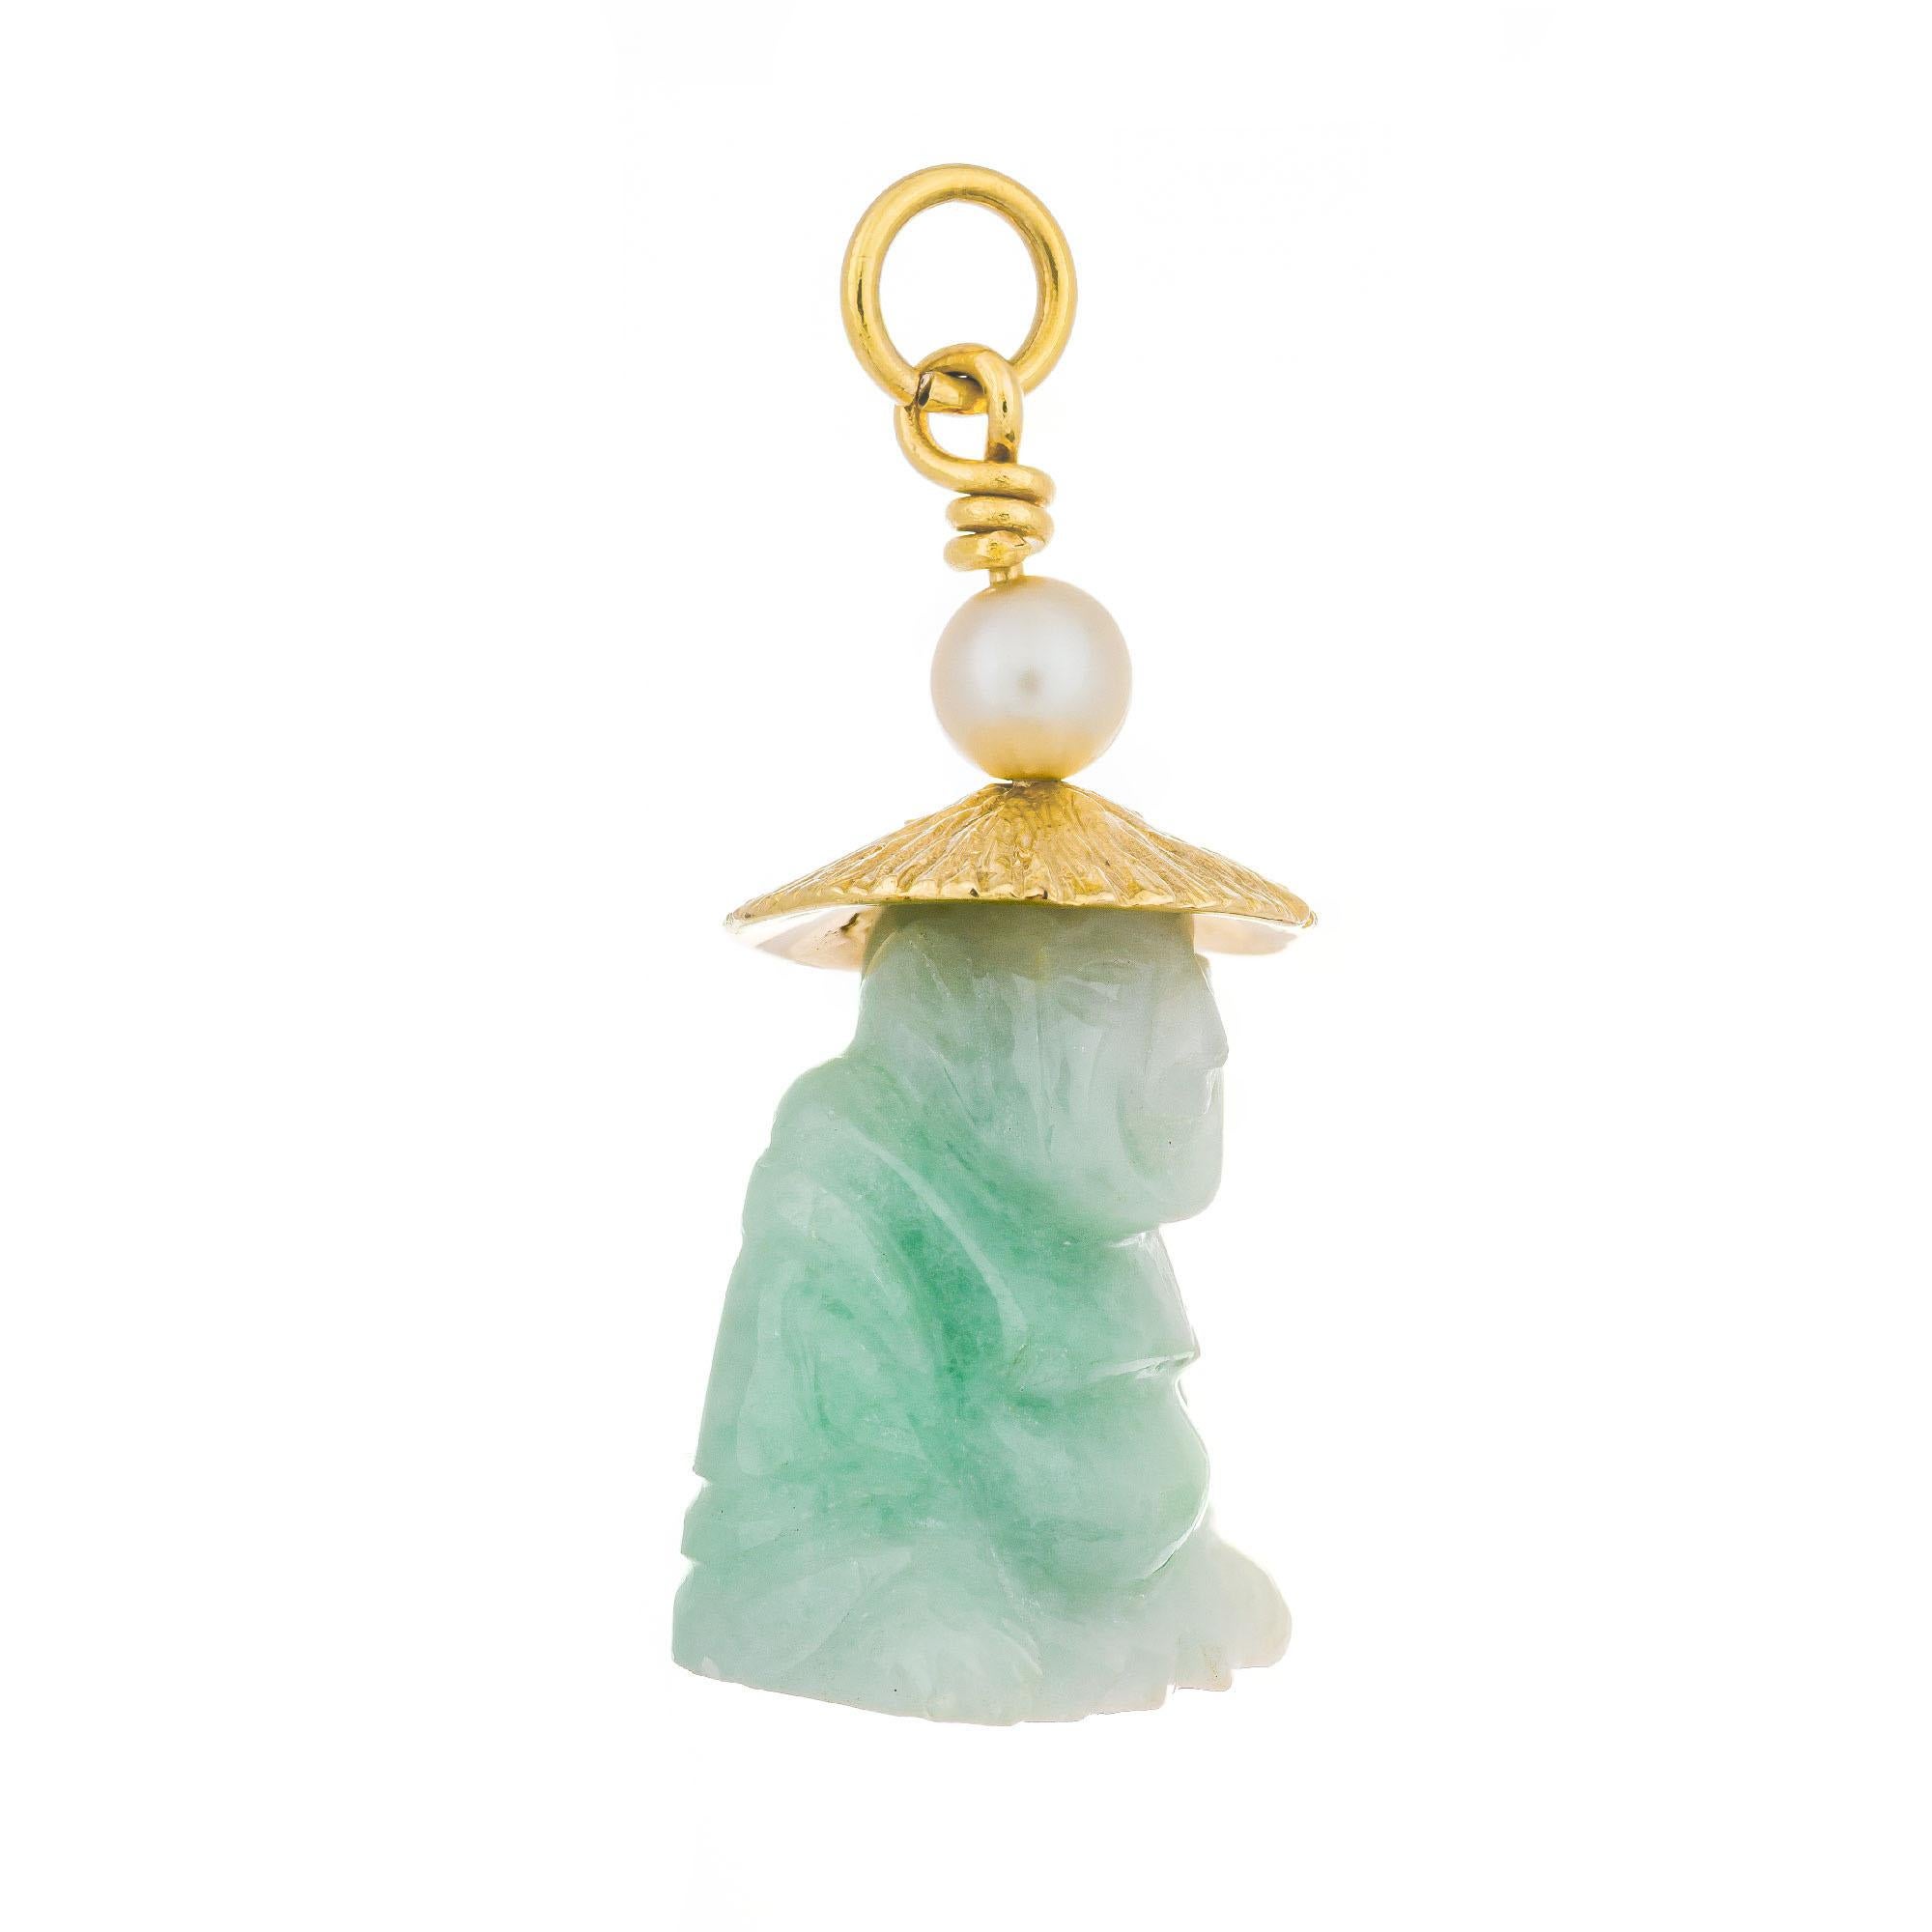 Natural light green translucent Jadeite Jade pearl Buddha pendant with a 14k yellow gold hat and top.

1 carved natural light green Jadeite Jade GIA Certificate # 6187062036
1 Japanese Akoya pearl 
14k yellow gold 
Stamped: 14k
Hallmark: CK
7.7